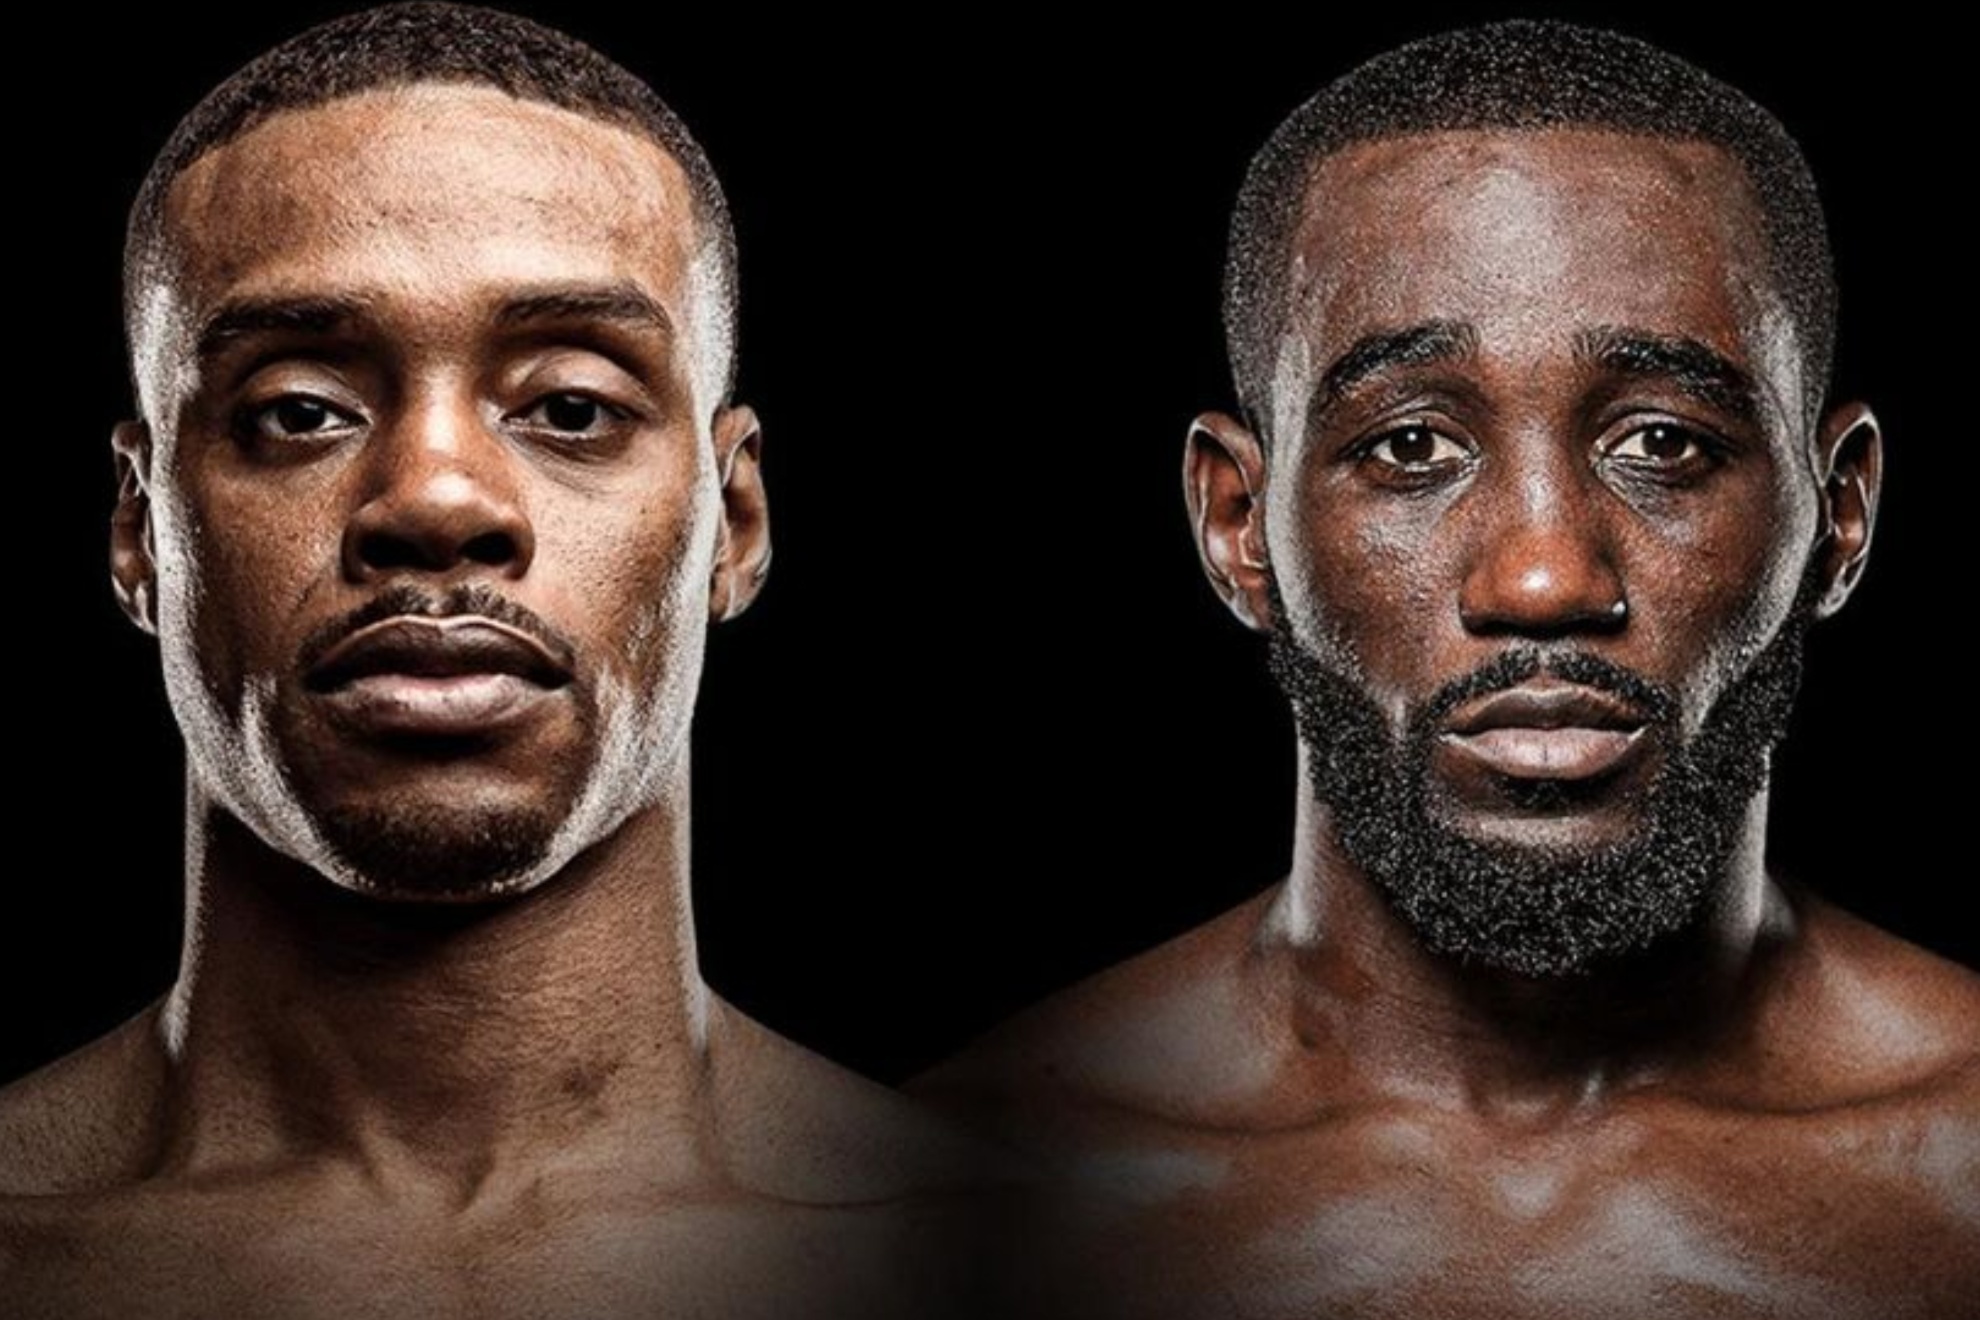 Unbeaten champions Errol Spence and Terence Crawford will fight this Saturday night.